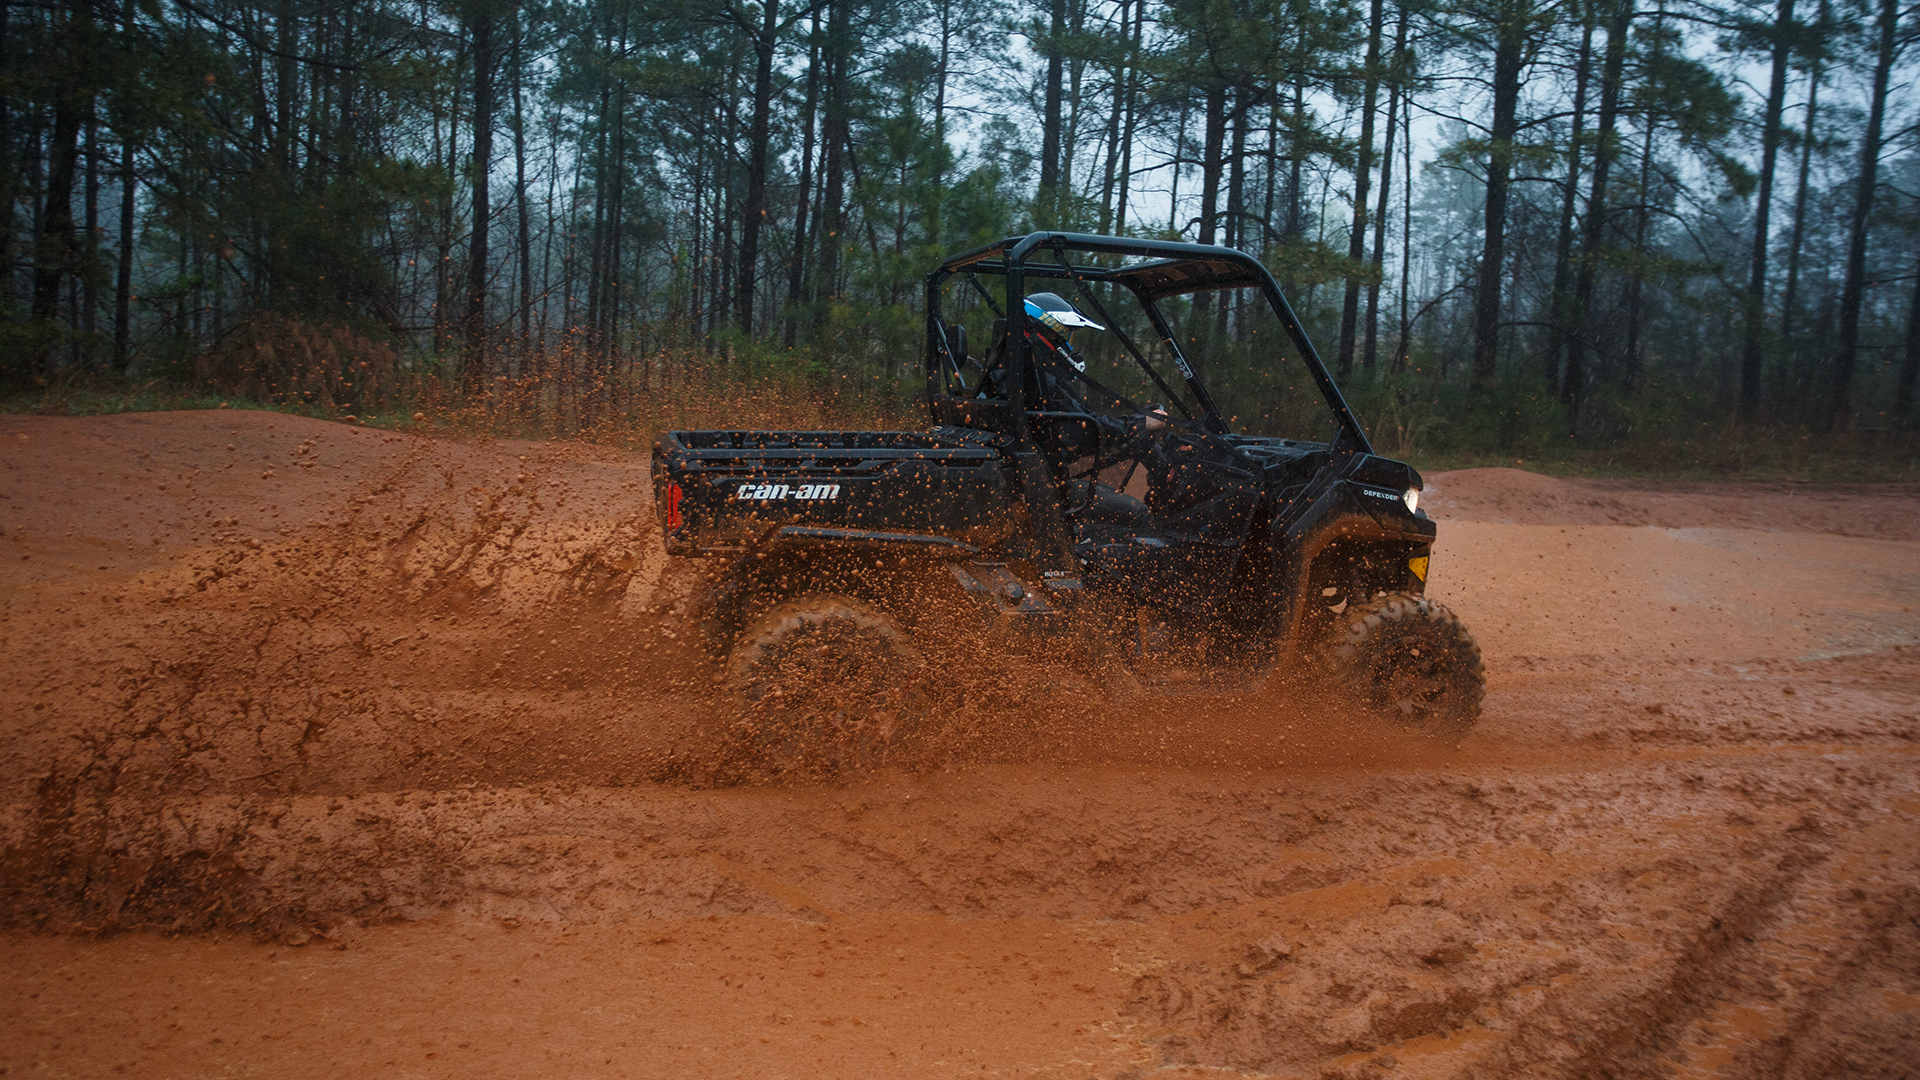 The Defender can handle mud with ease.